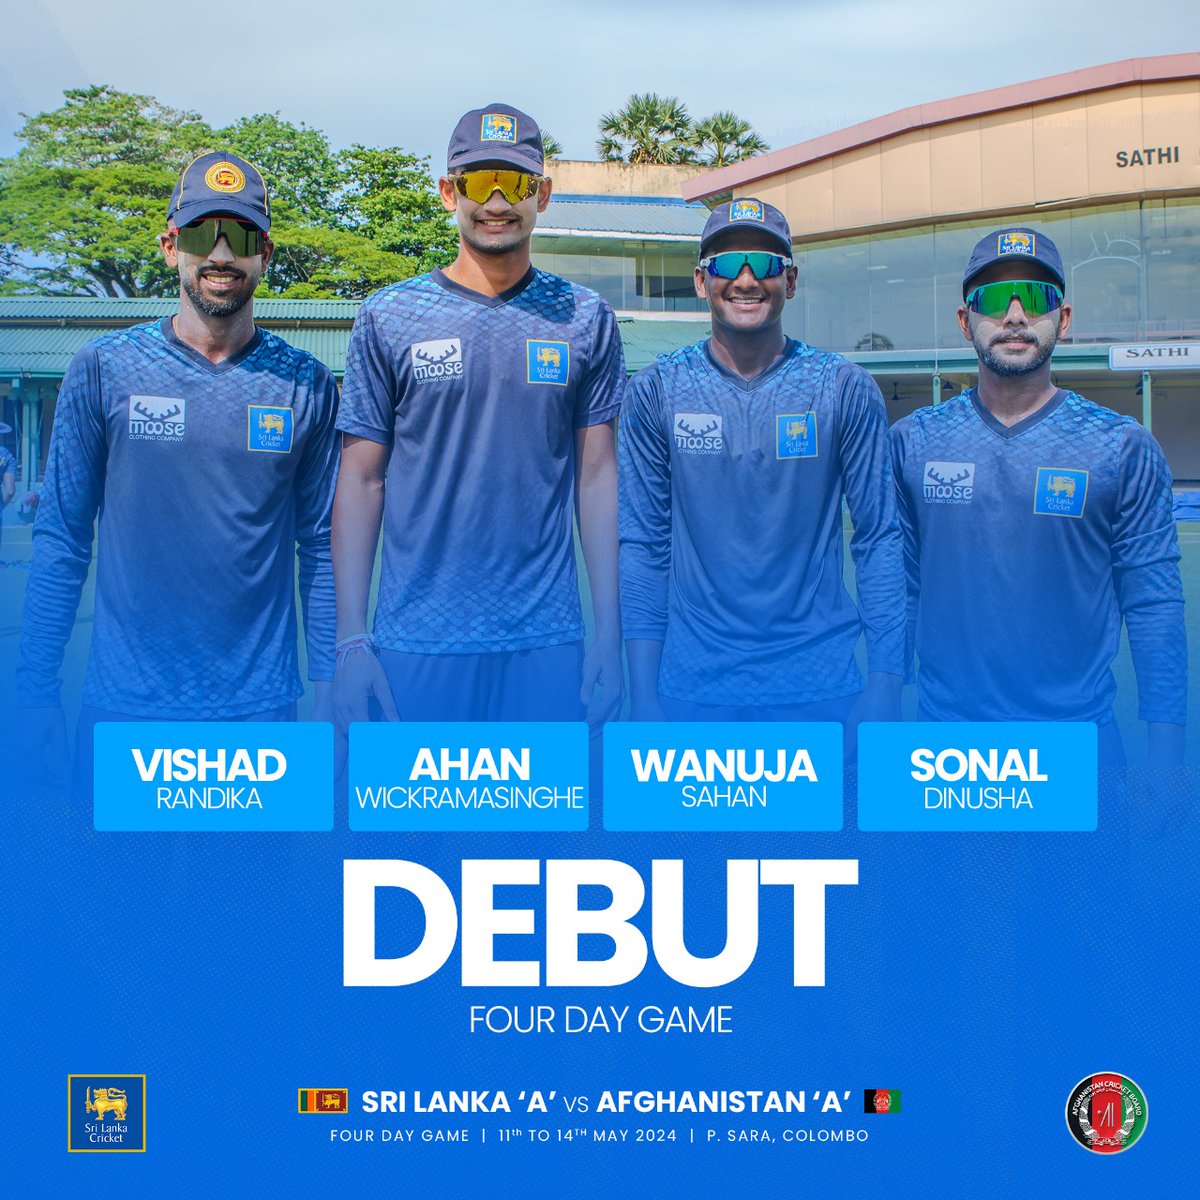 There are four exciting debutants for Sri Lanka 'A' today - Ahan, Vishad, Wanuja, and Sohan. Best of luck! 🙌 #SLvAFG #SLATeam